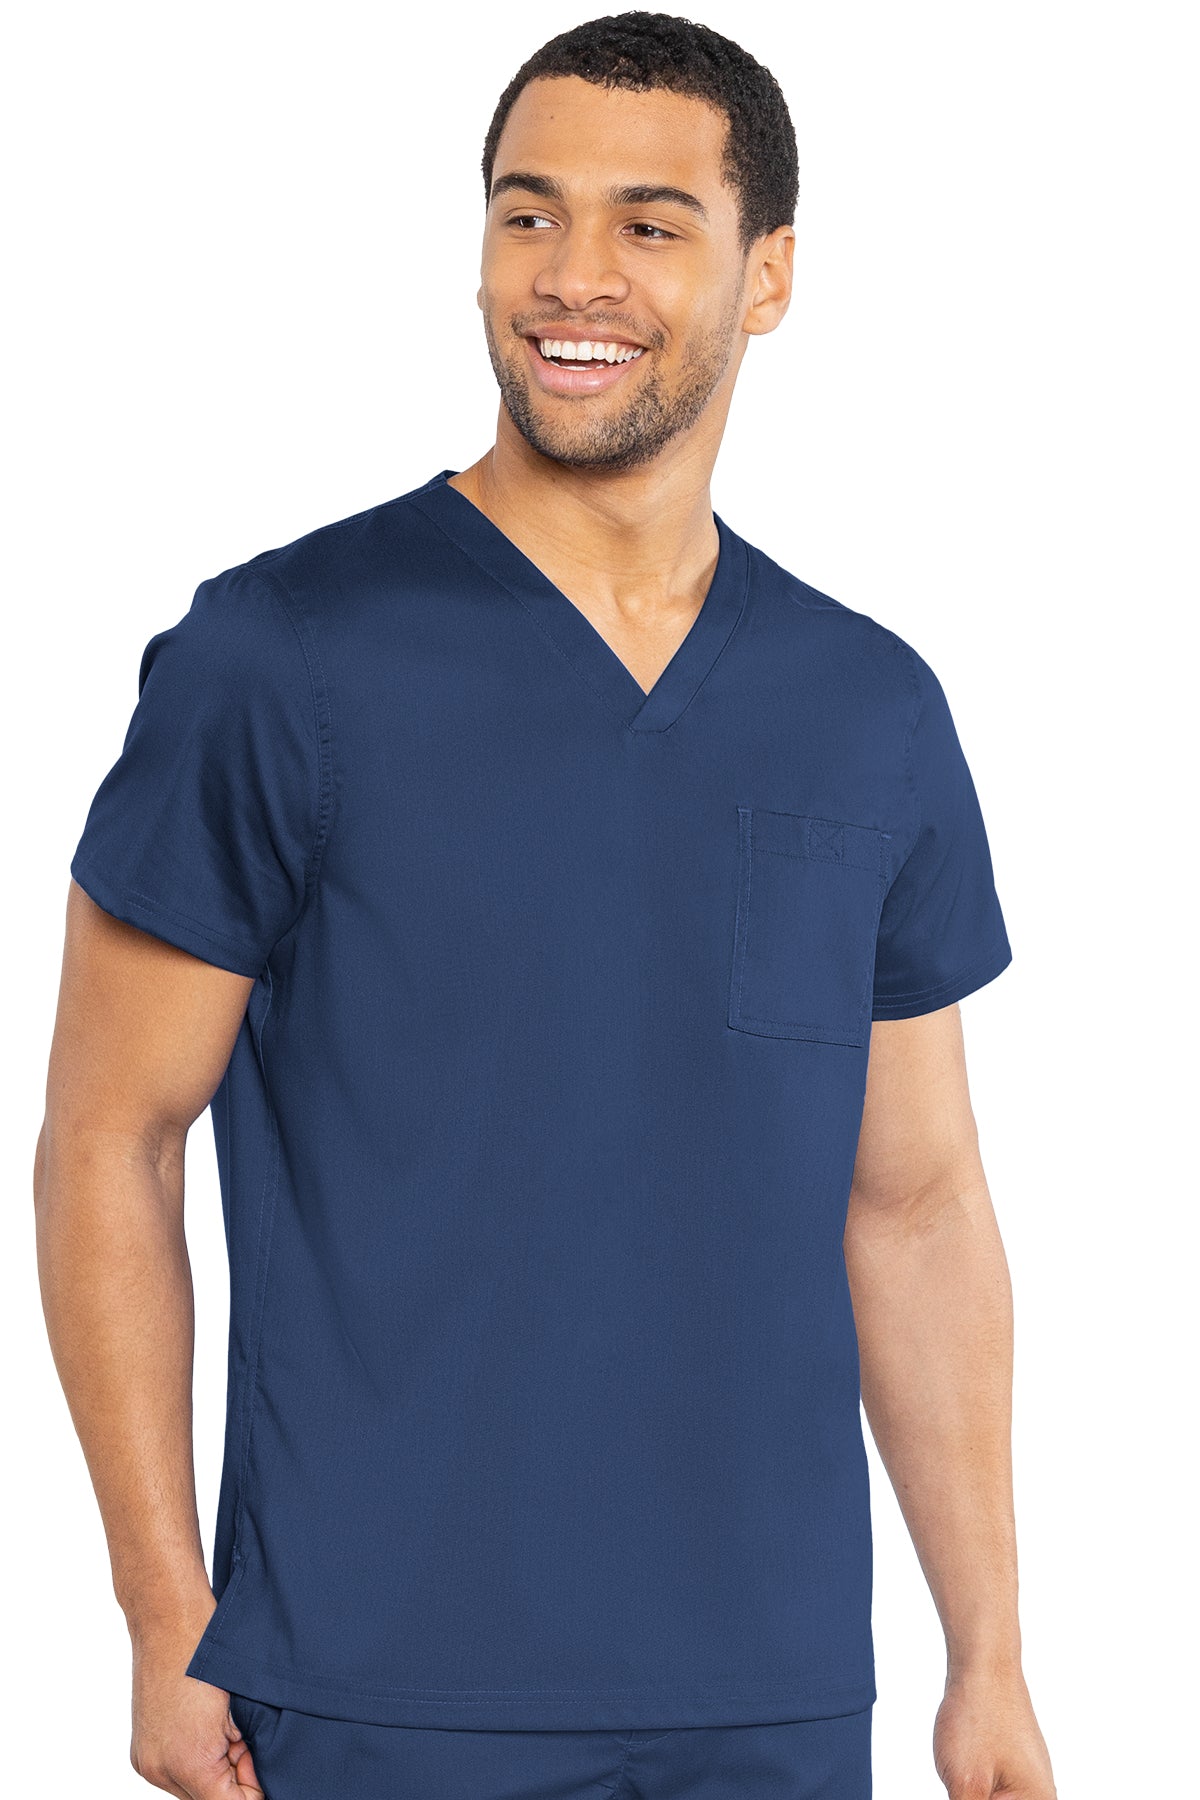 Med Couture Roth Wear 7478 Cadence Men's Top Navy 